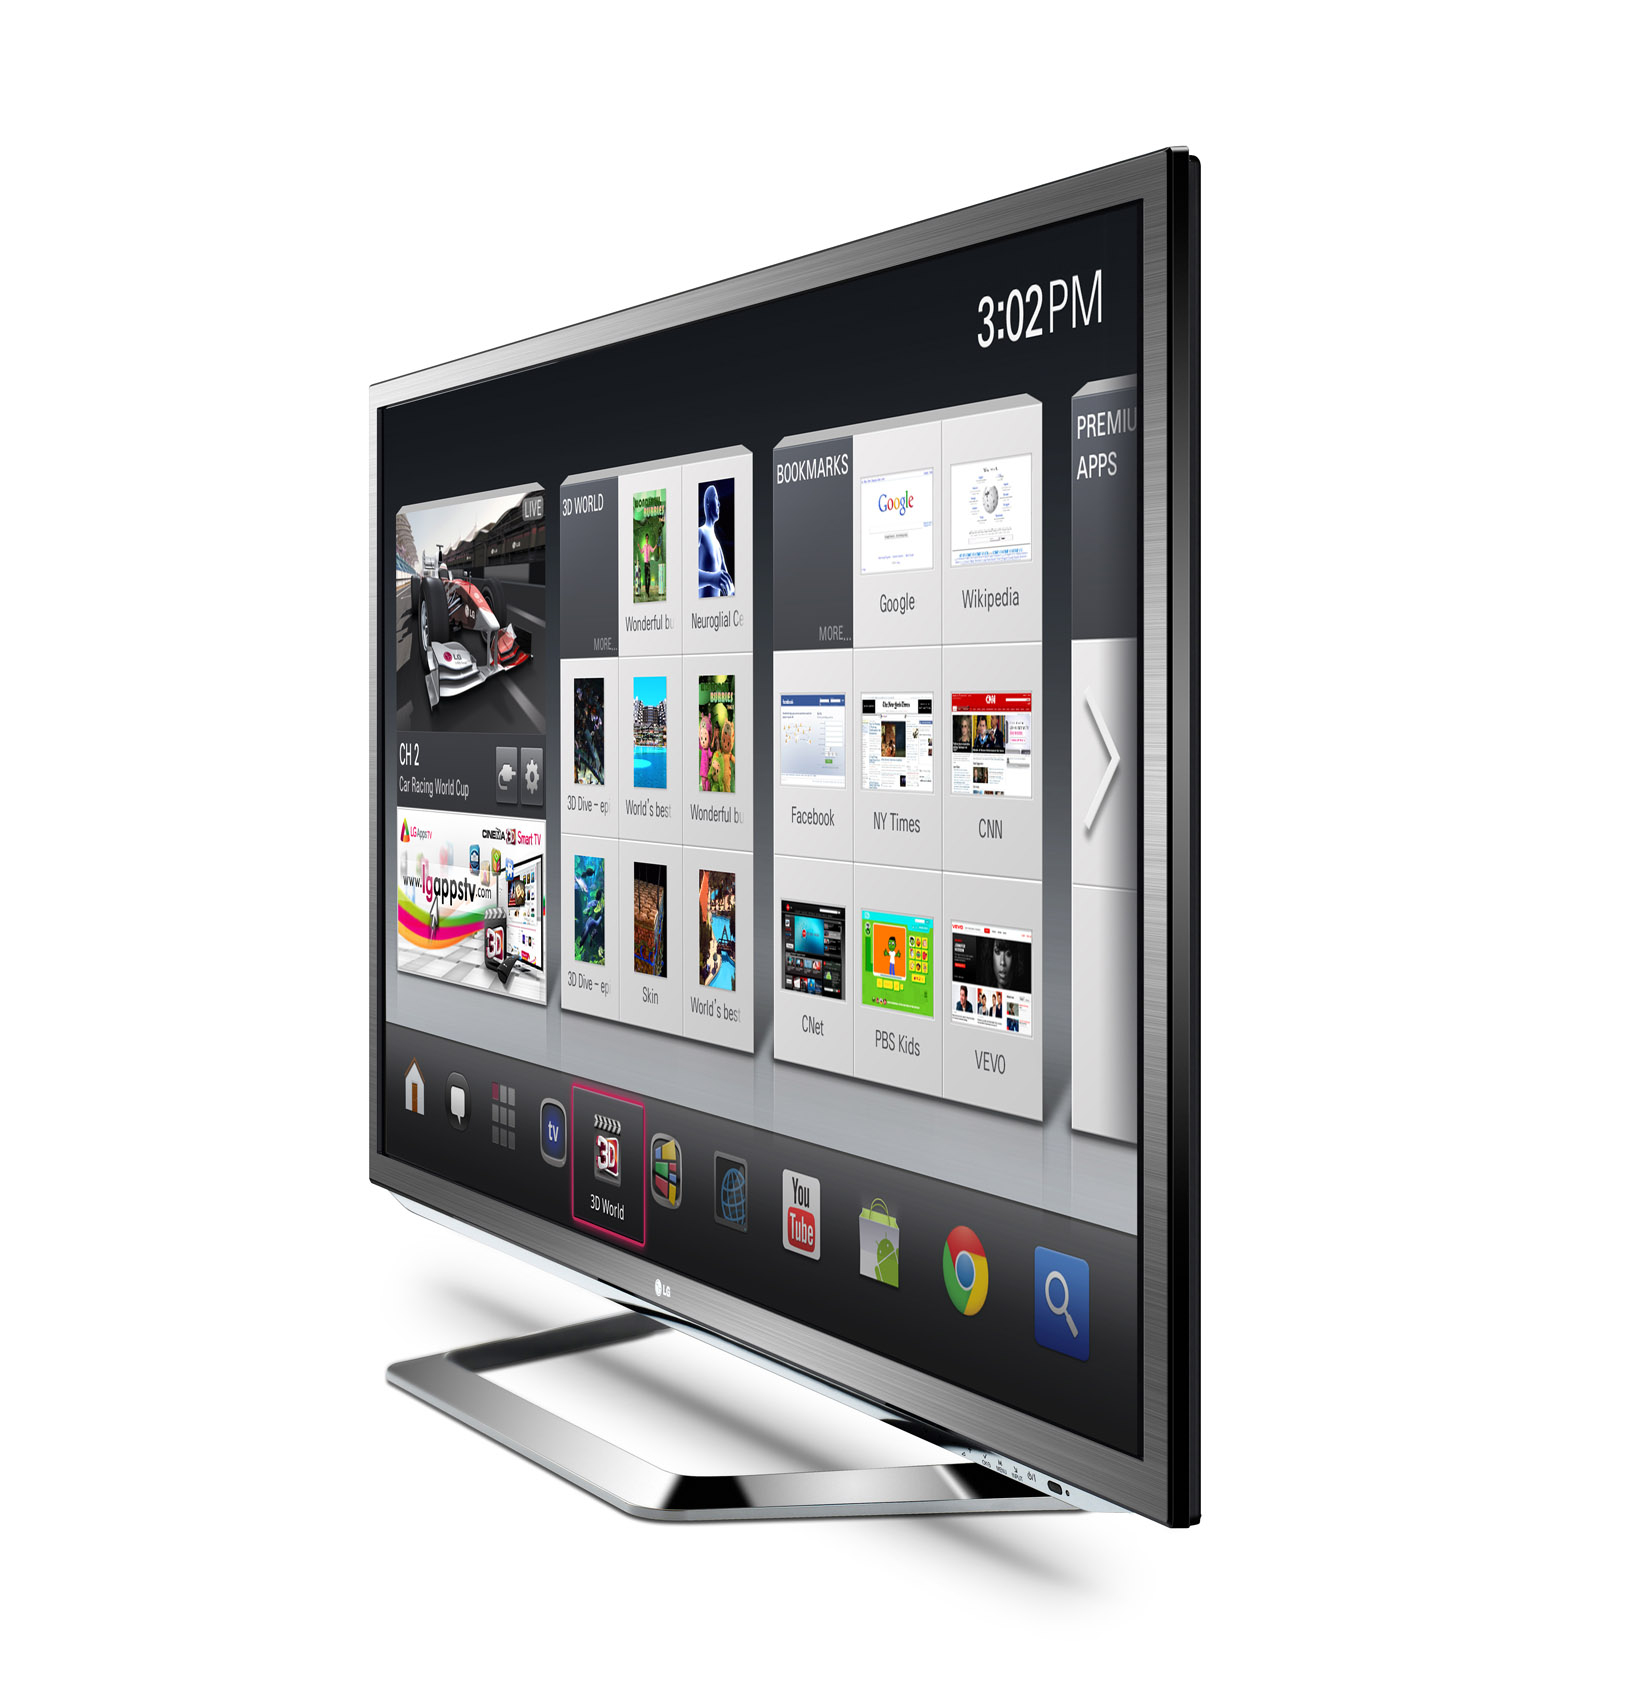 Right-side view of the LG Google TV displaying Google Android OS